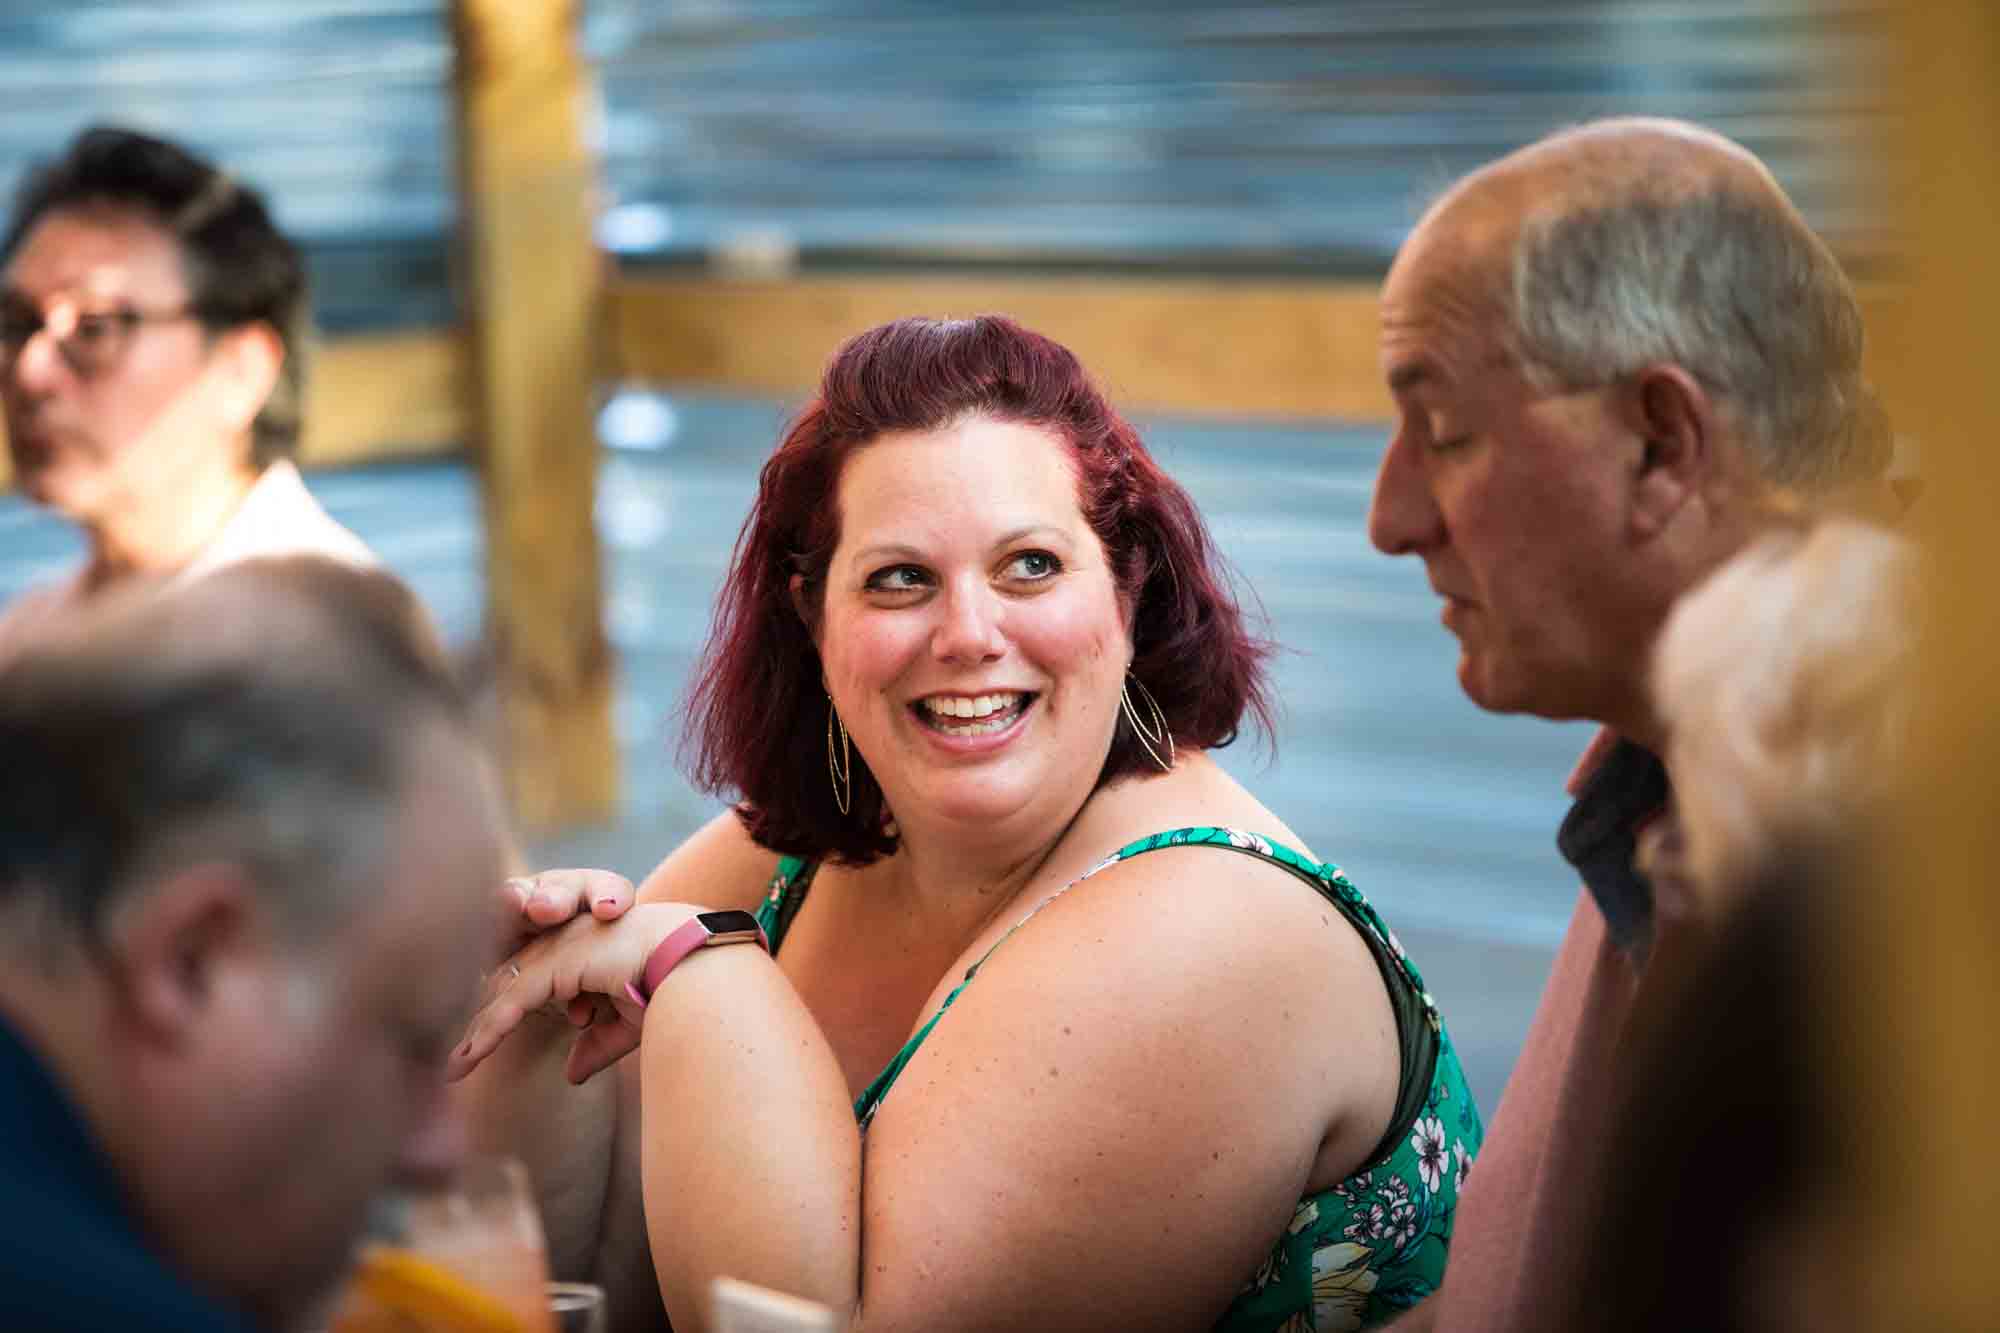 Woman with red hair chatting during rehearsal dinner at an outdoor restaurant